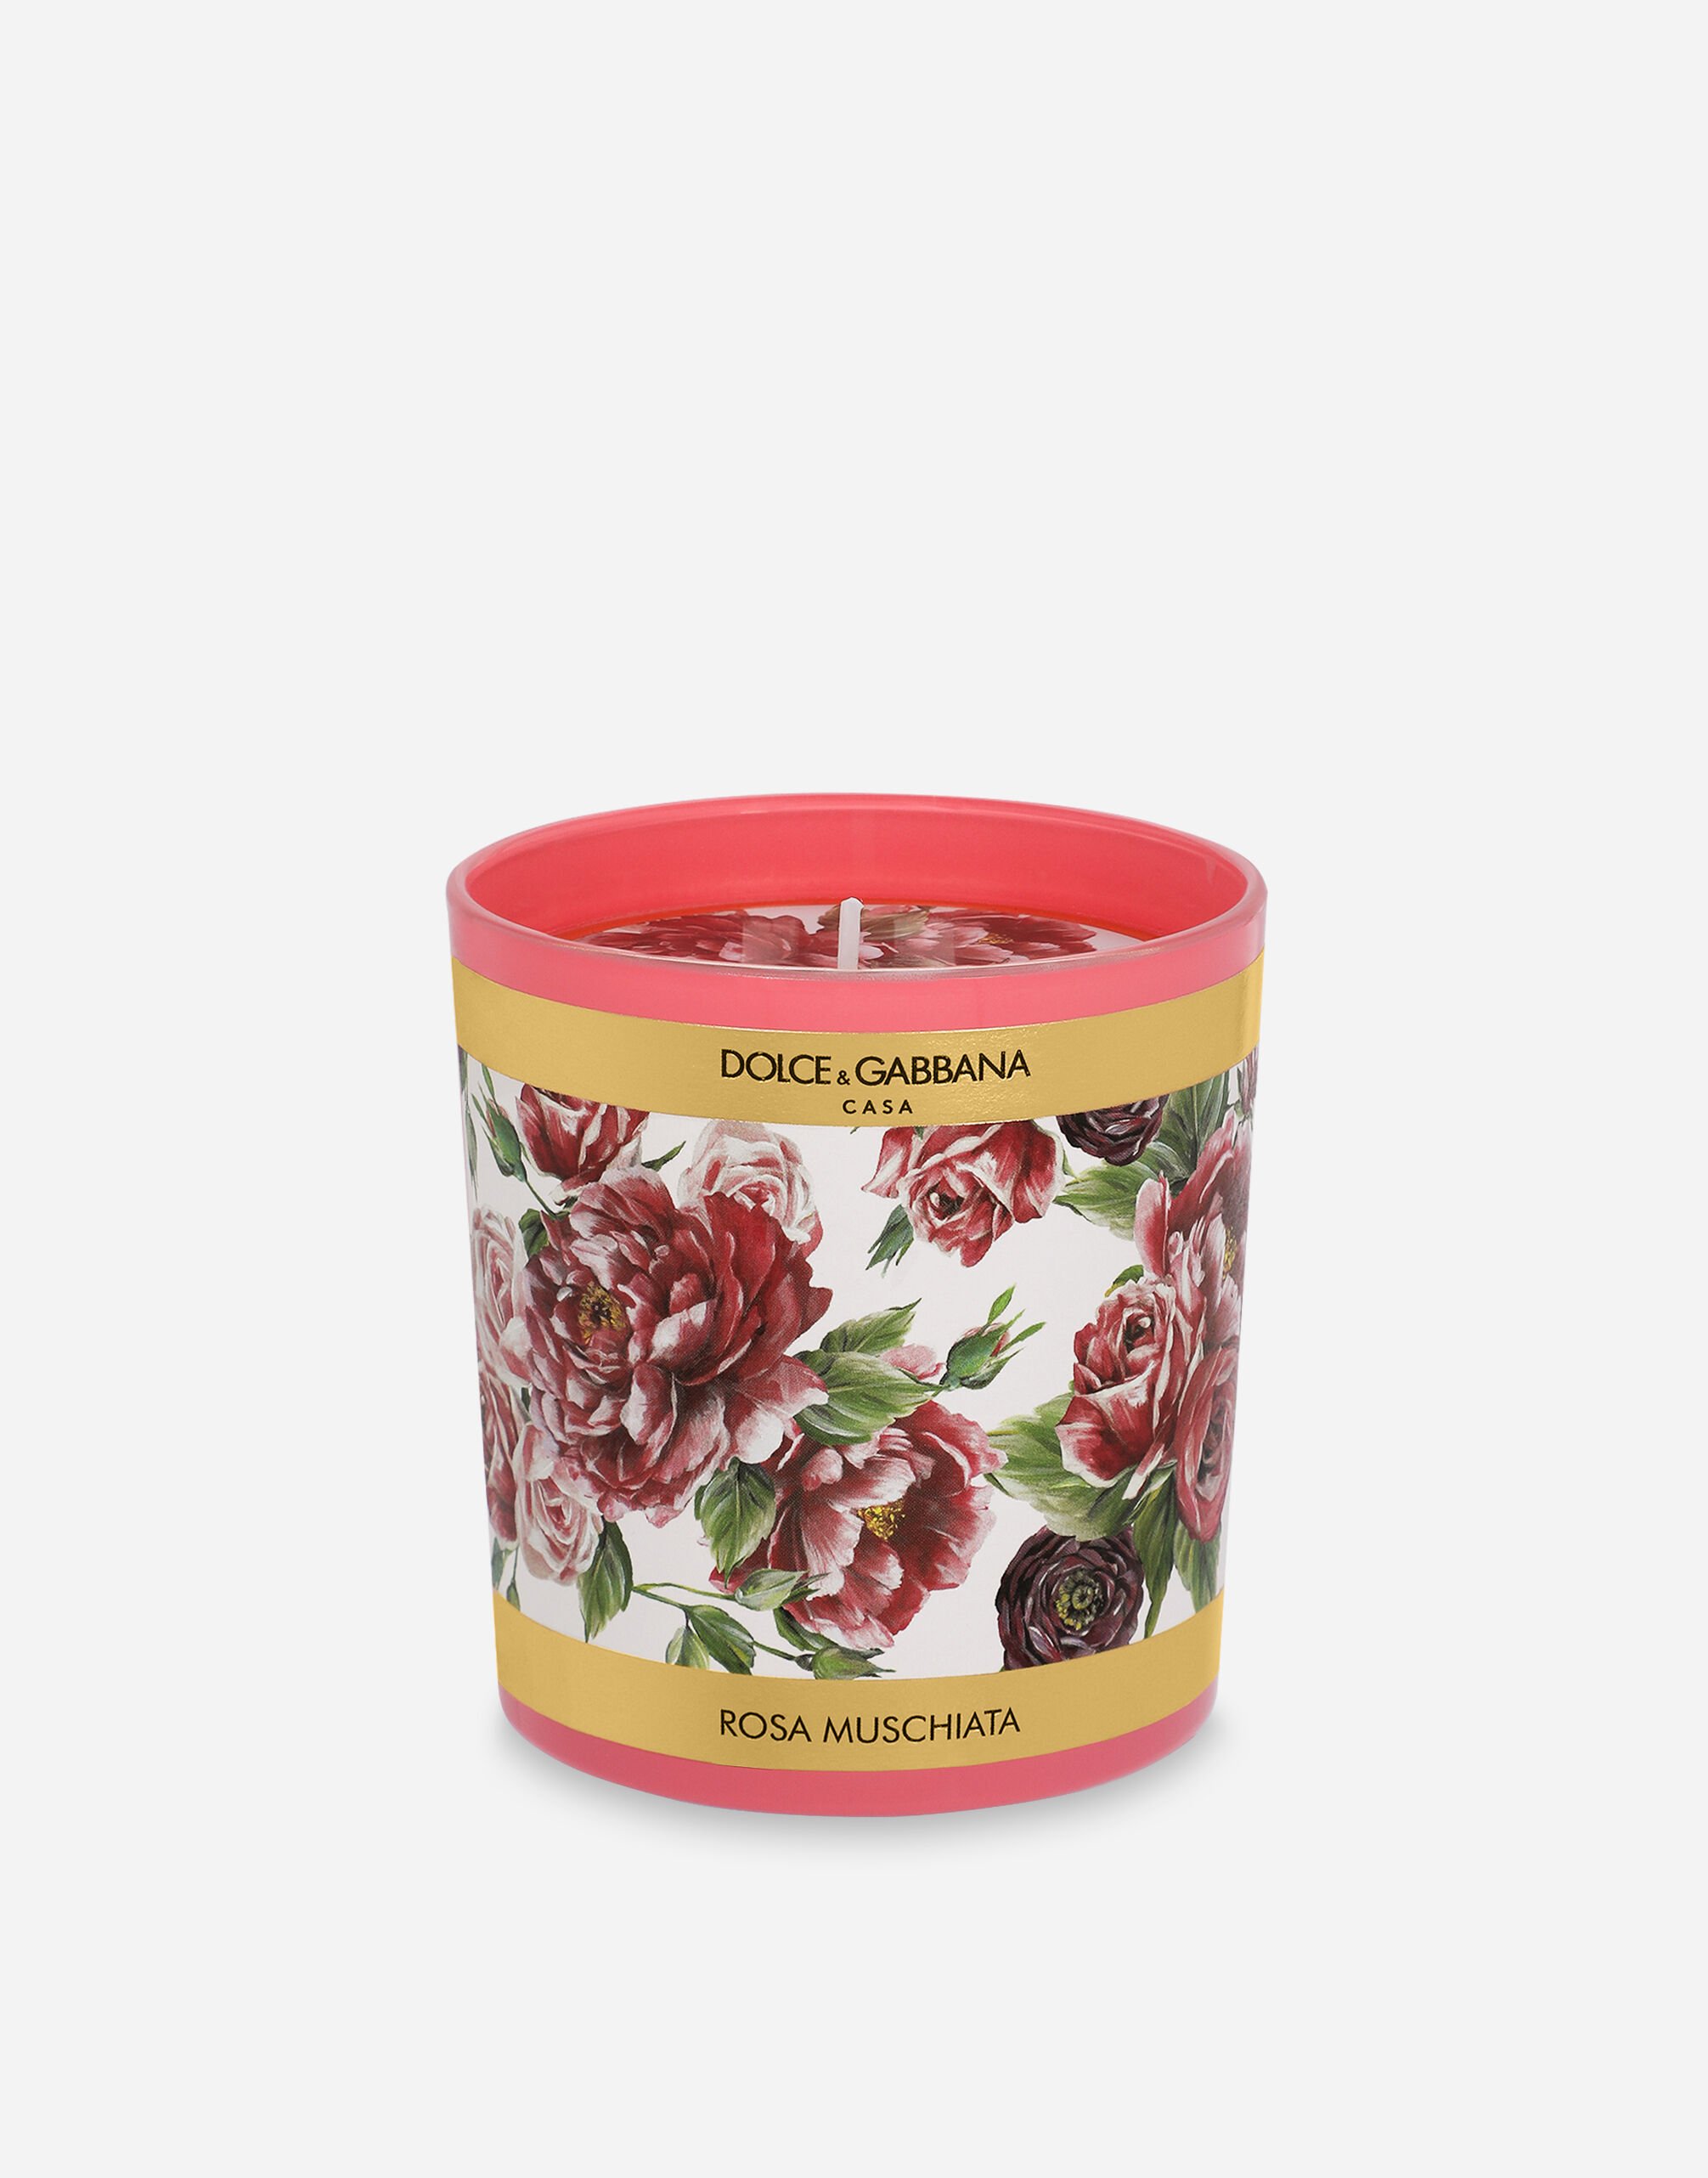 Dolce & Gabbana Scented Candle - Rosa Moschata Multicolor VL1132VLTW2